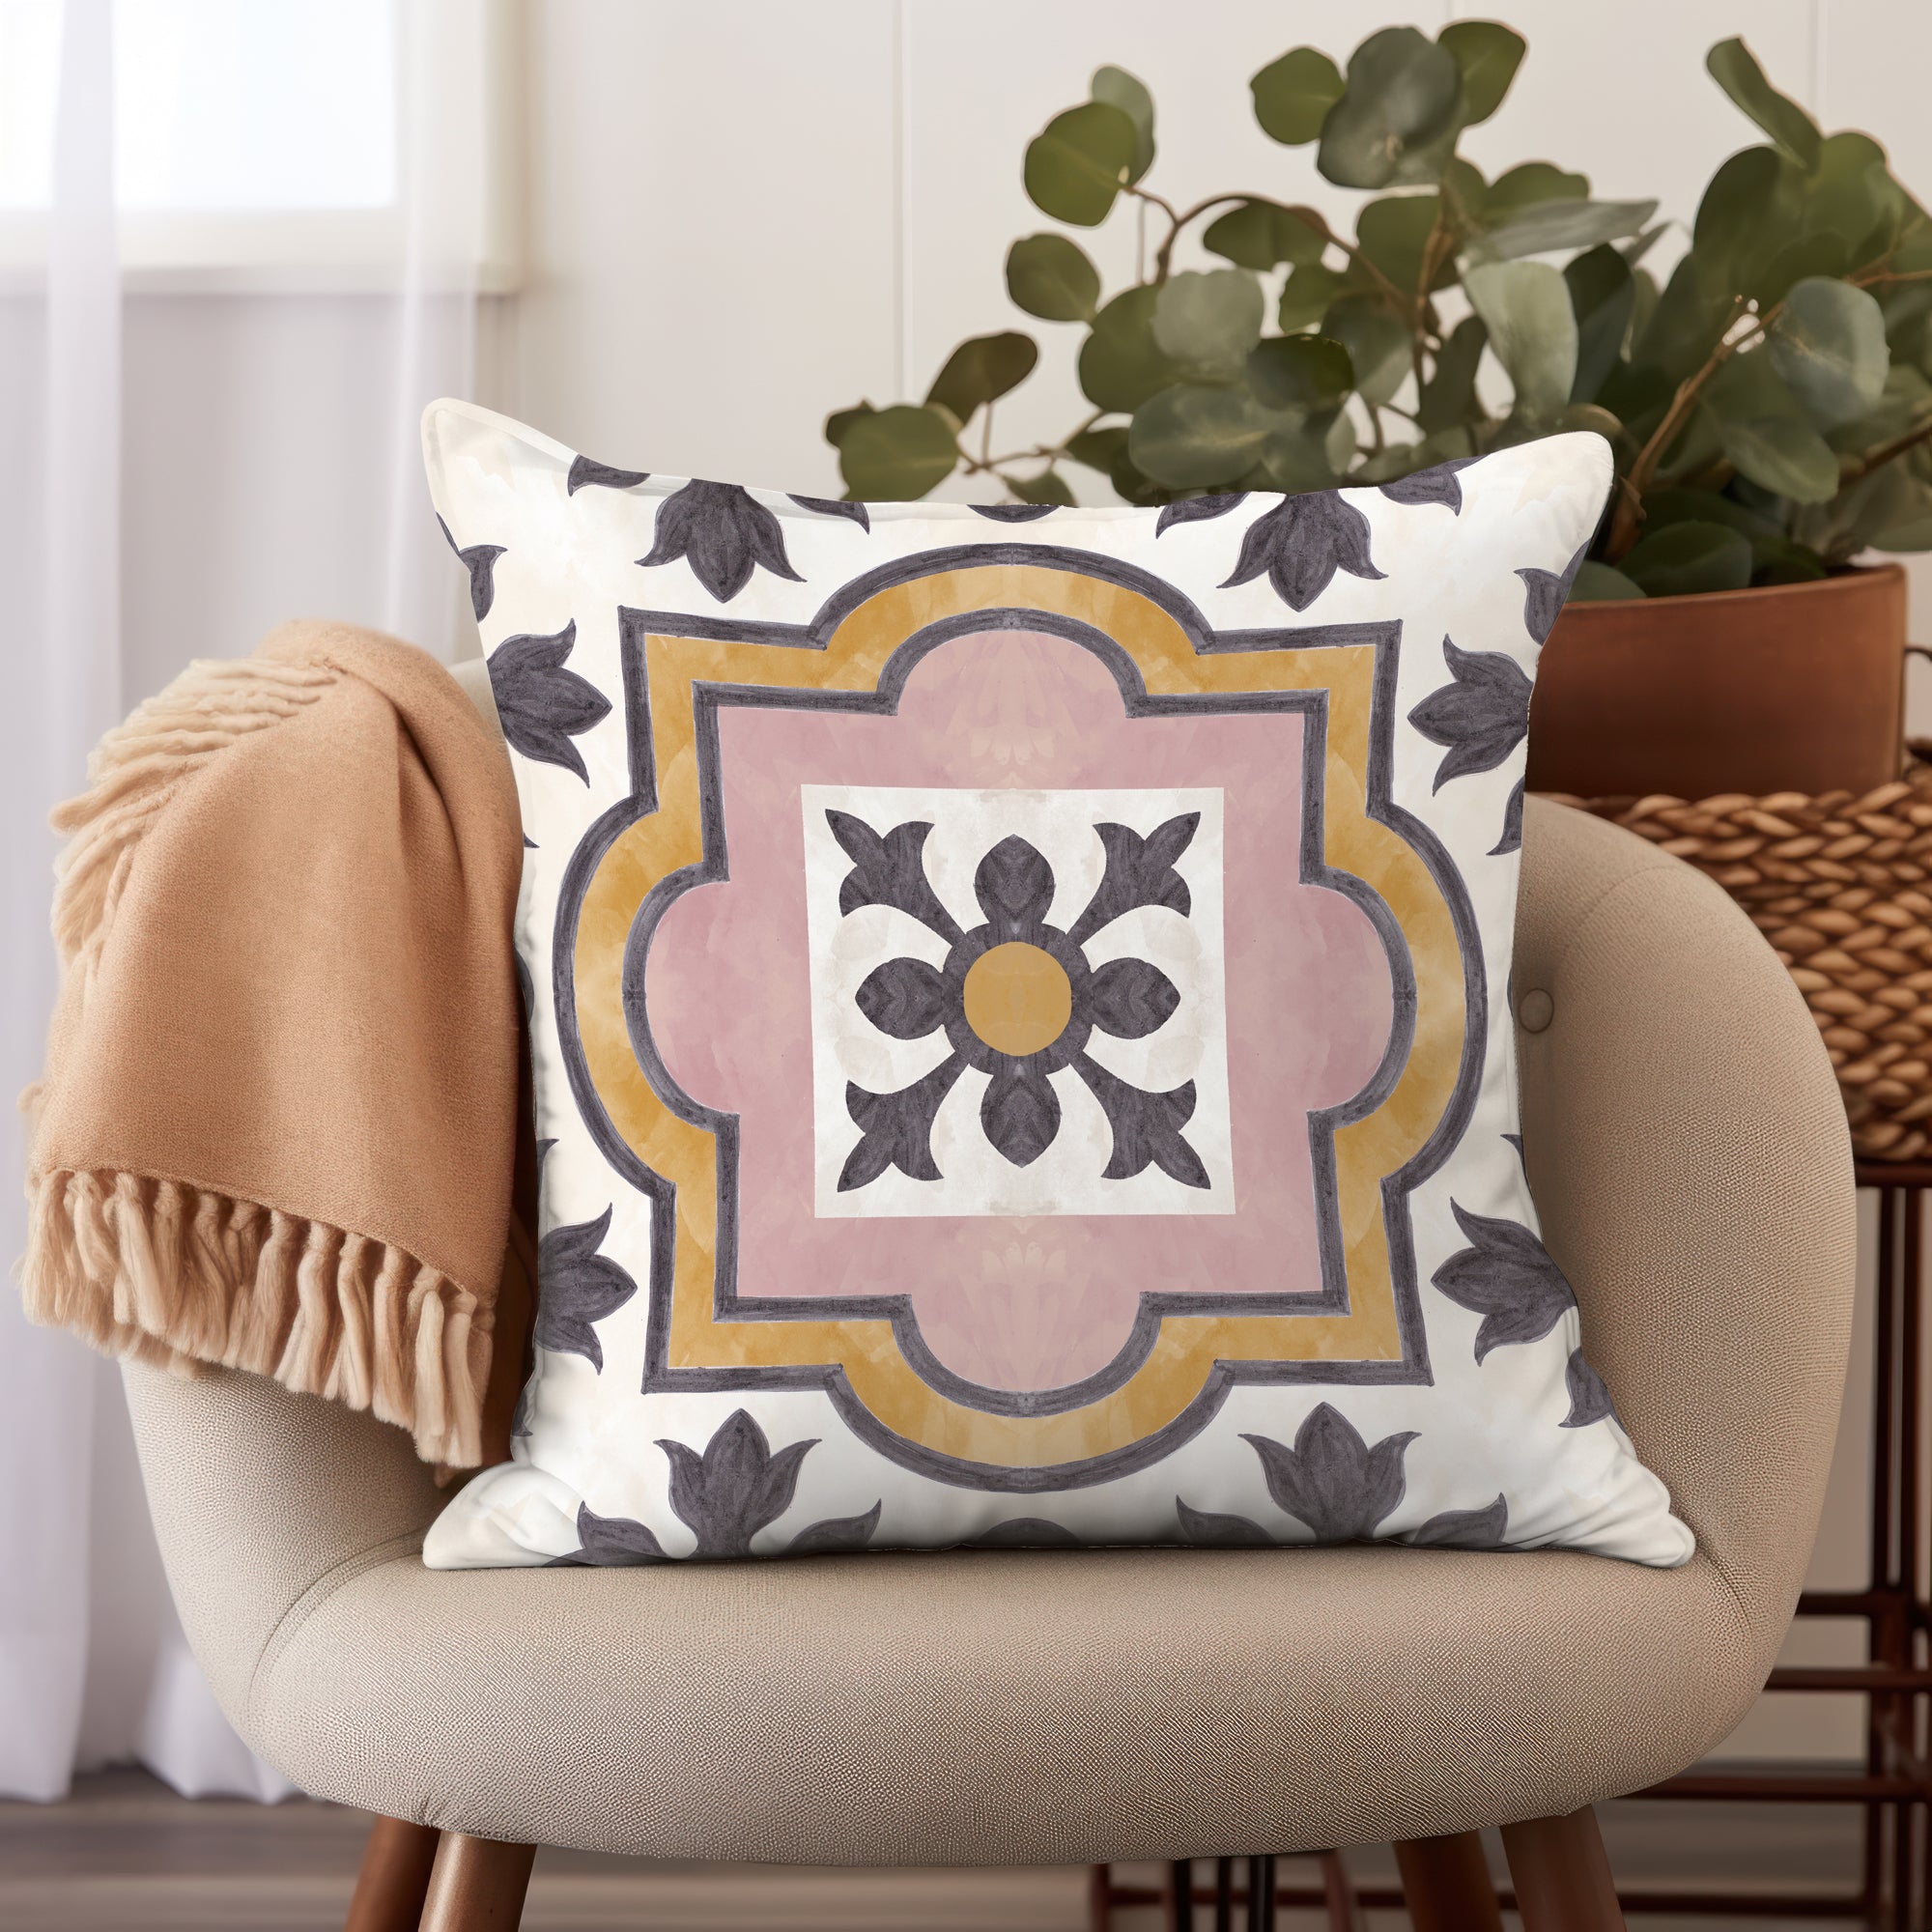 a decorative pillow on a chair with a plant in the background